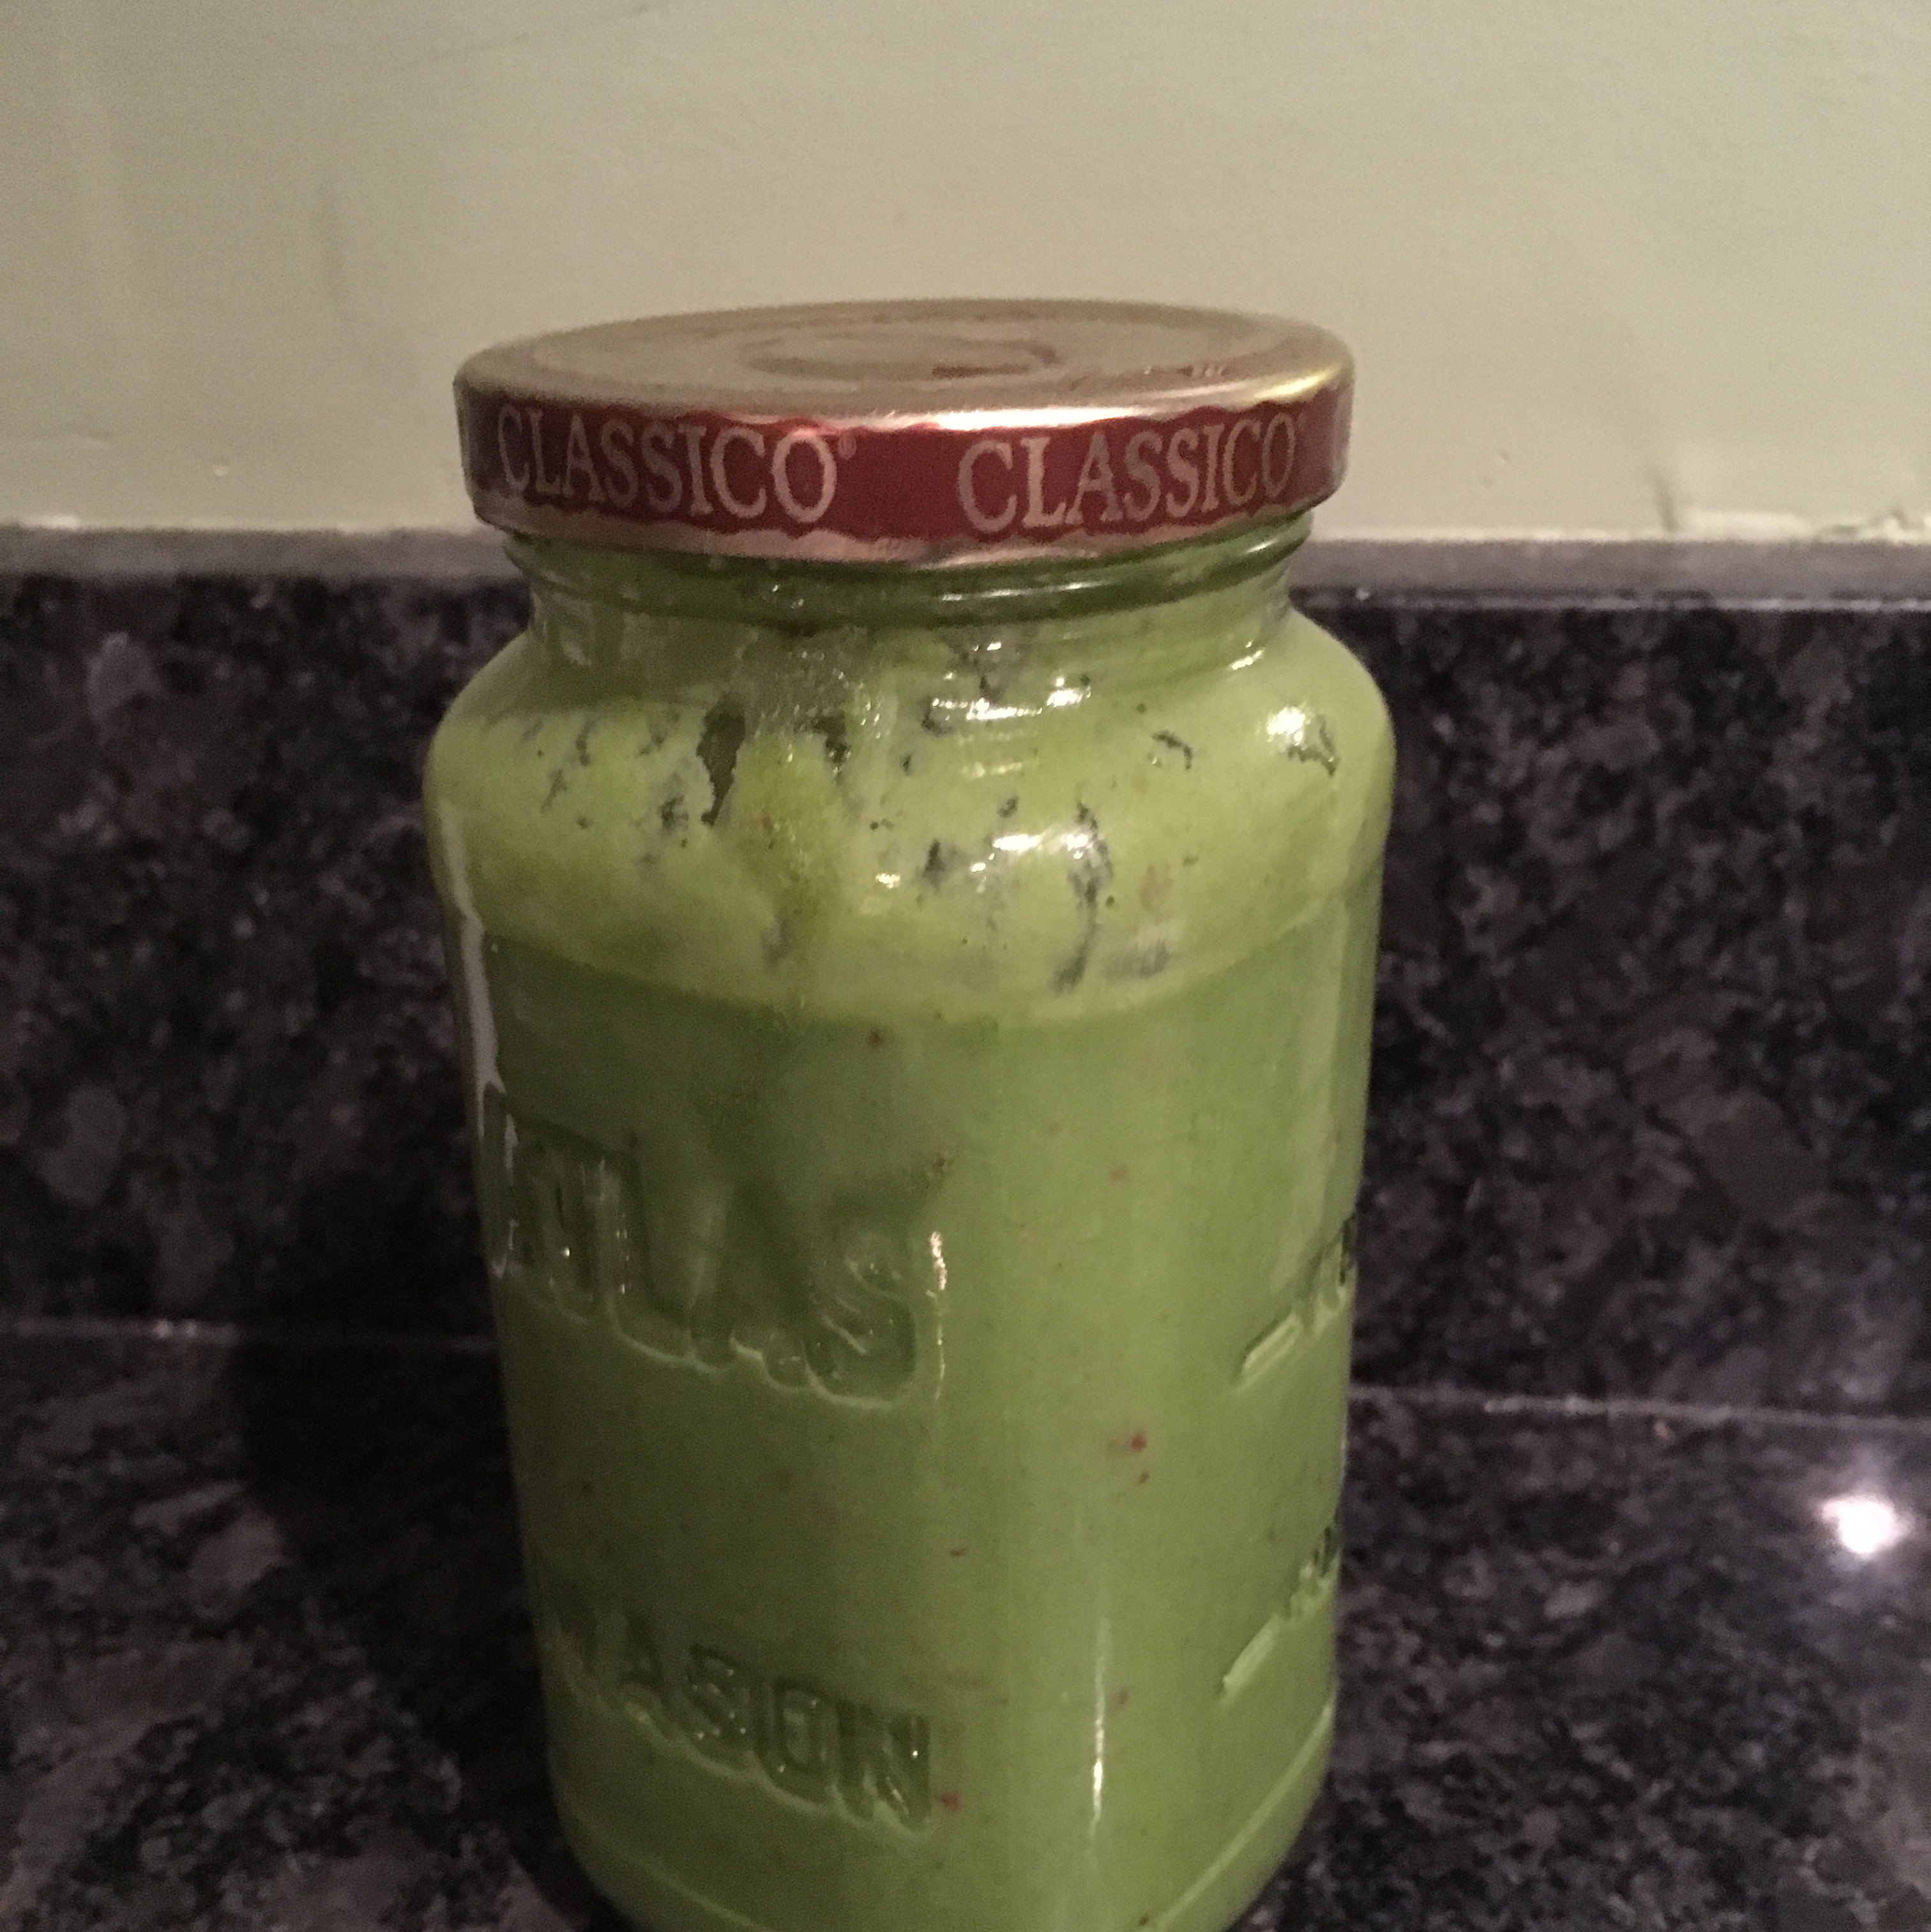 Groovy Green Smoothie 